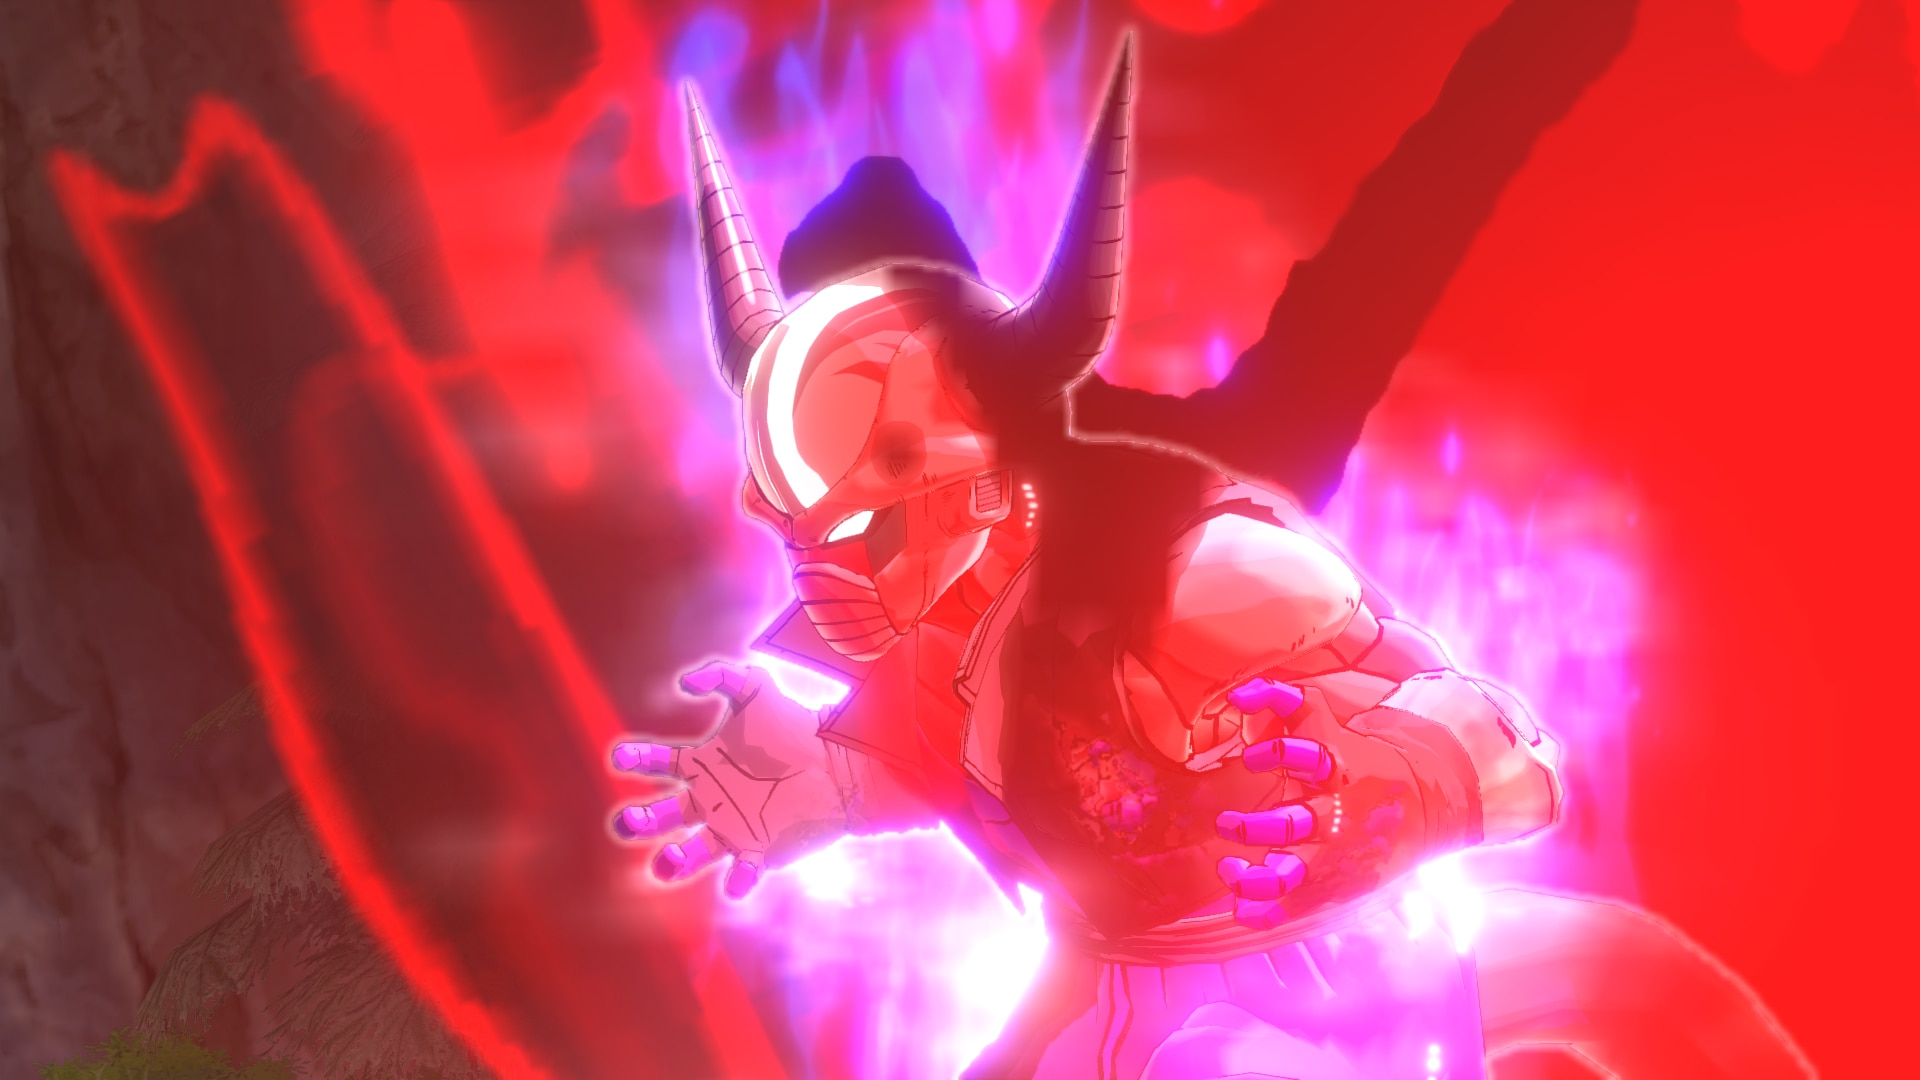 The End of the World *Director's Cut! – Xenoverse Mods